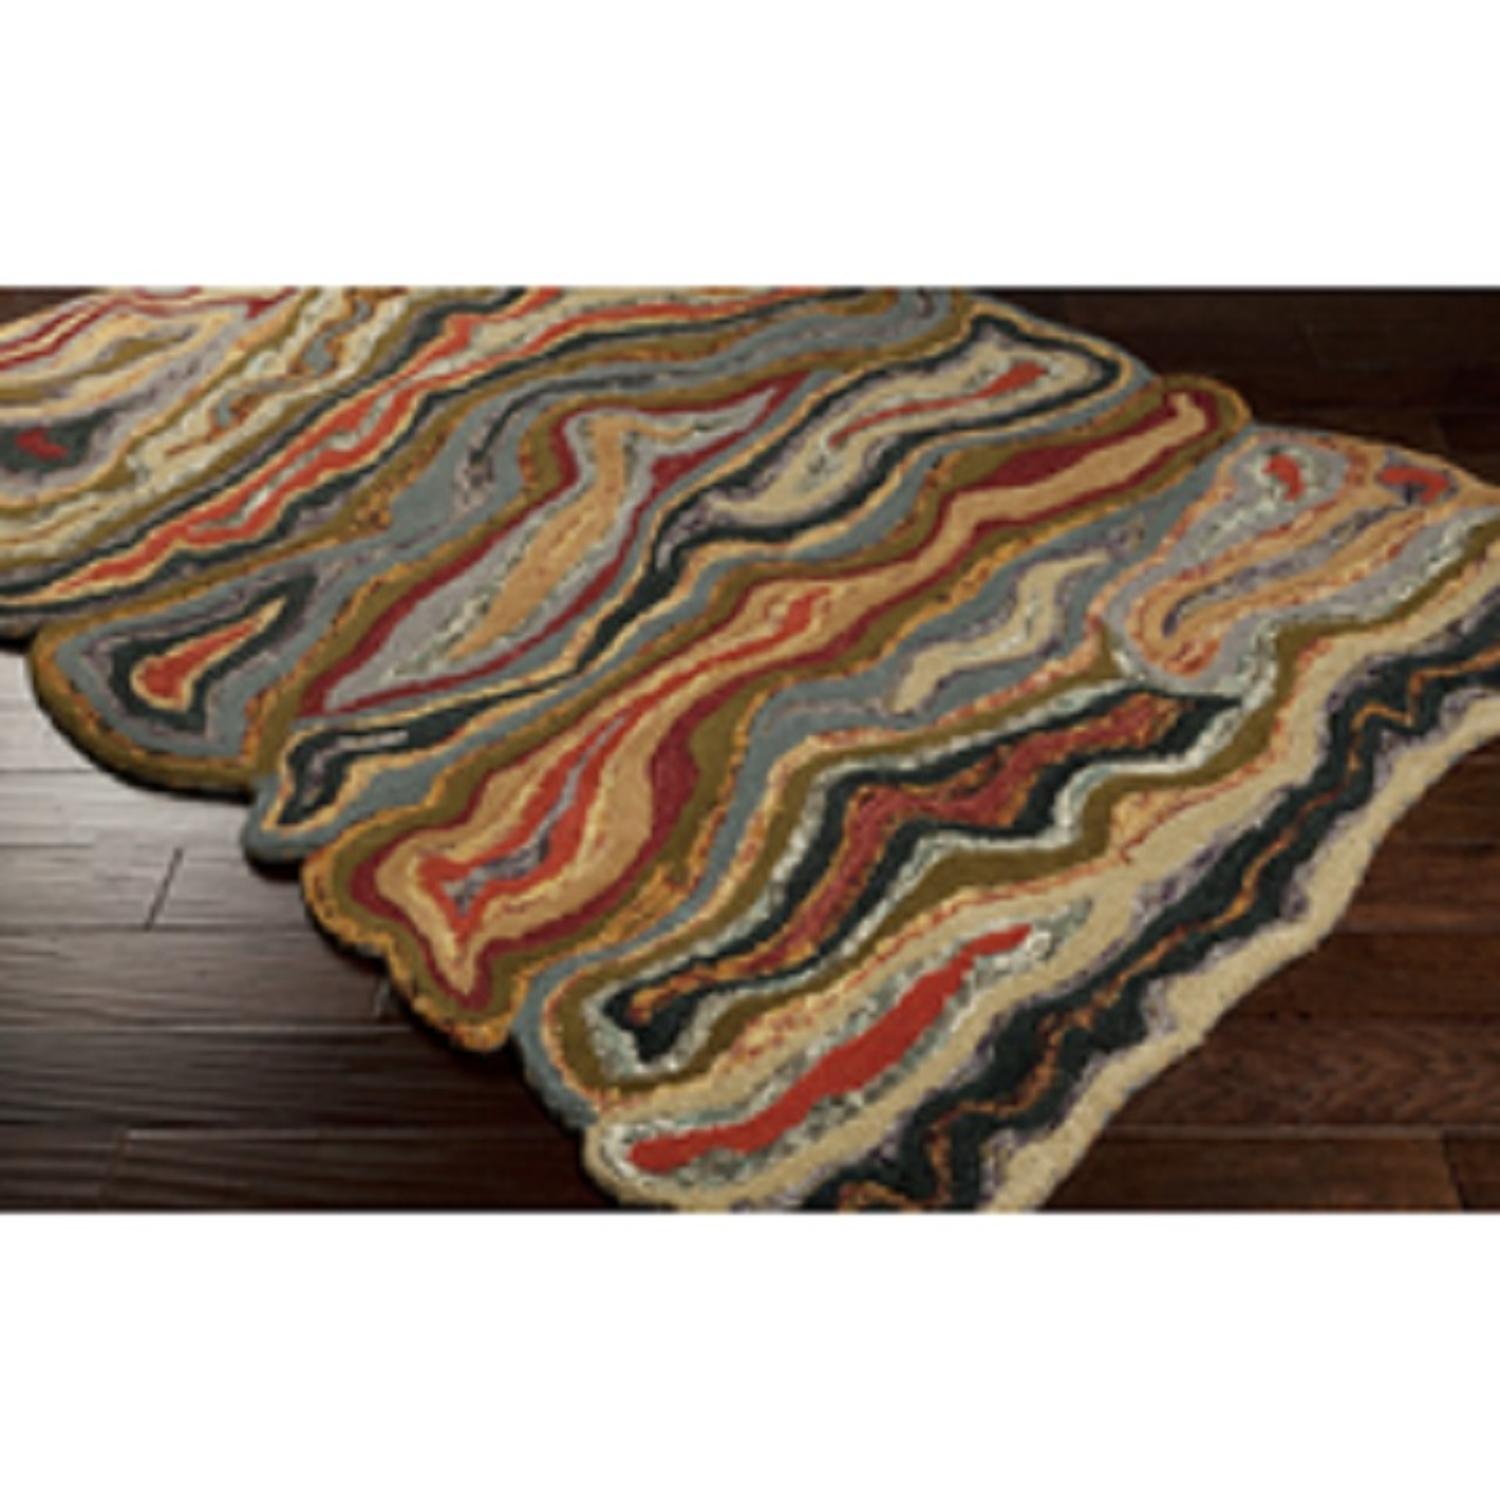 Diva At Home 3'3" x 5'3" Capas Burgundy Red and Forest Green Plush Hand Tufted Wool Area Throw Rug